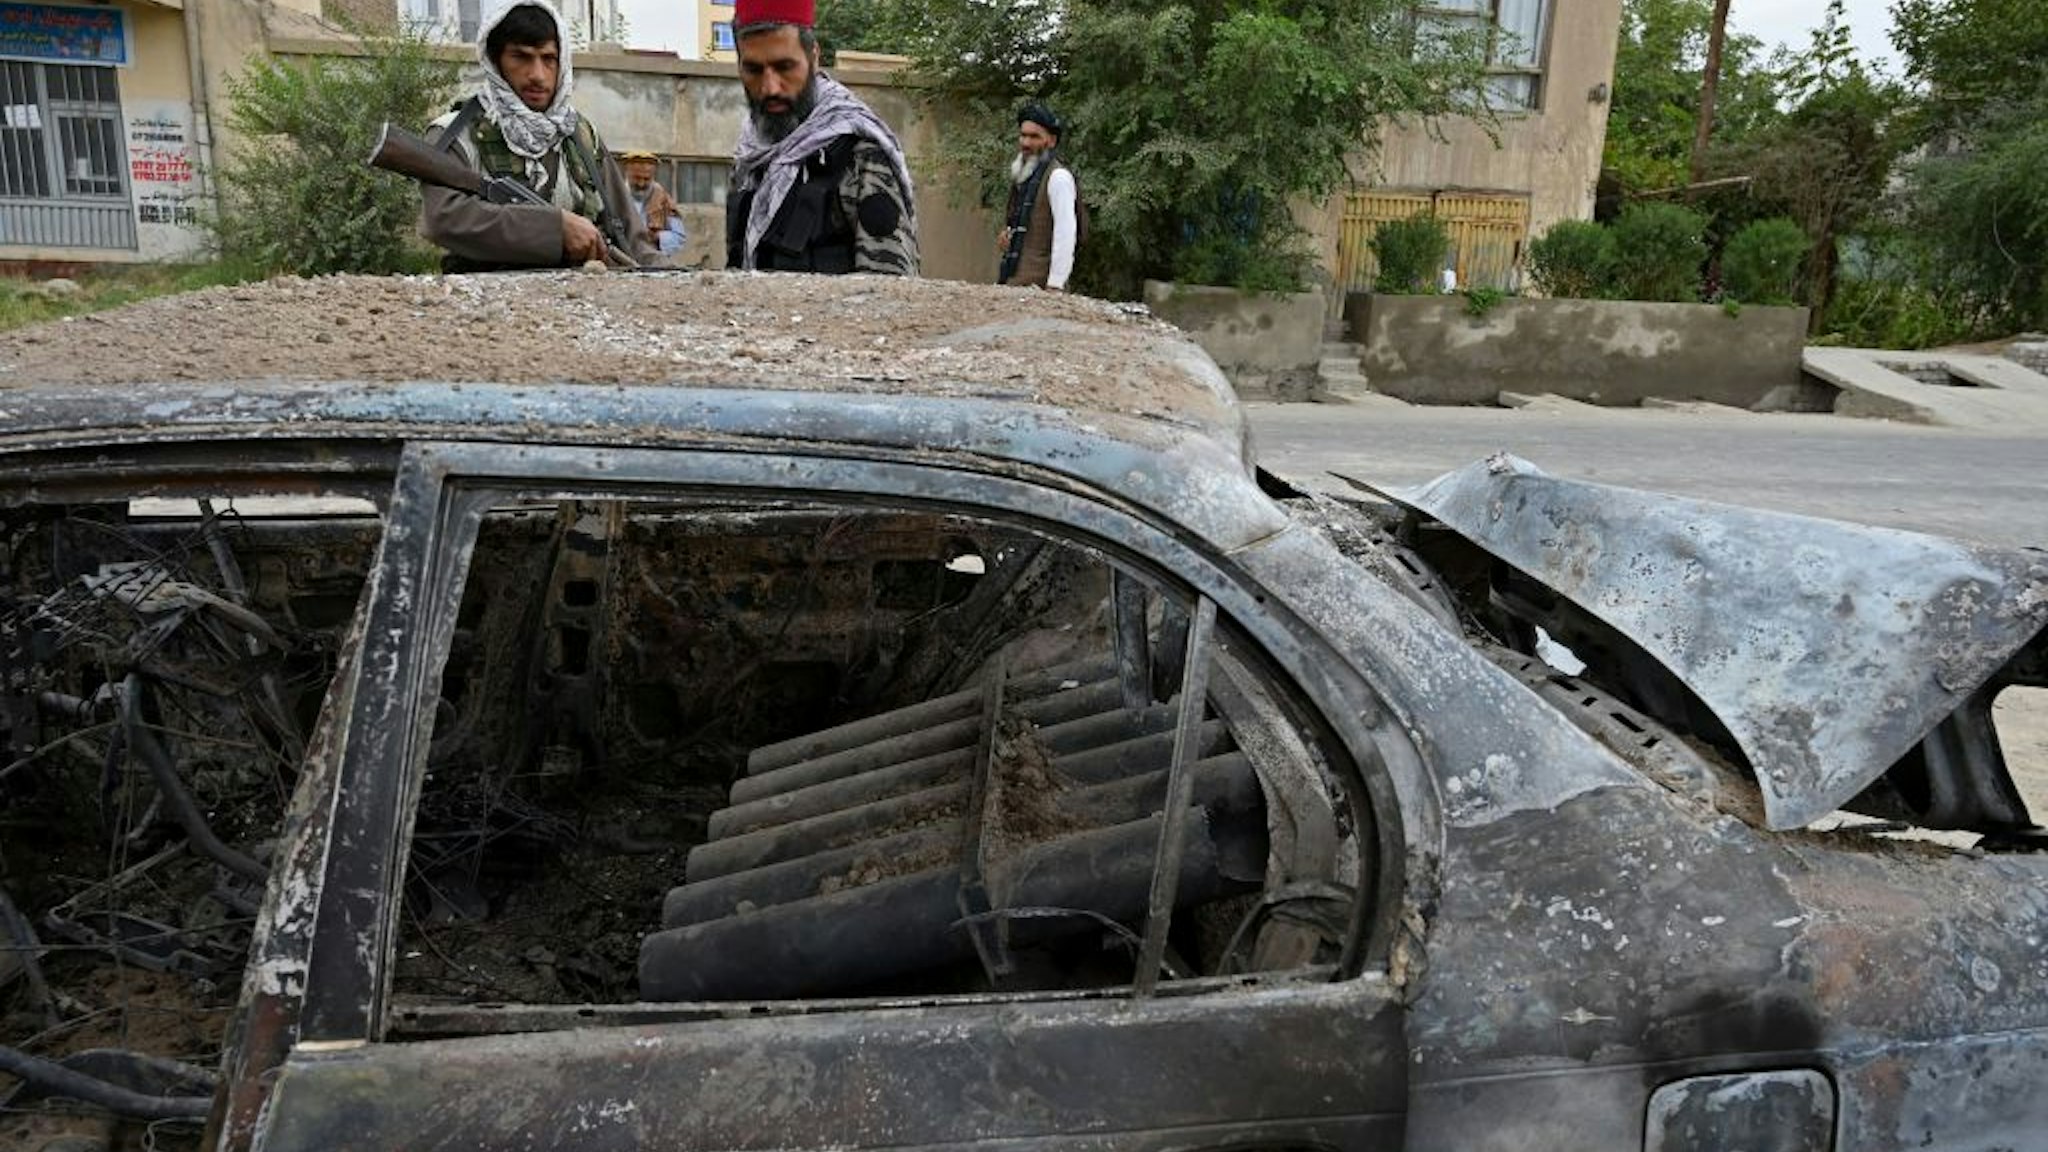 Taliban fighters investigate a damaged car after multiple rockets were fired in Kabul on August 30, 2021. - Rockets flew across the Afghan capital on August 30 as the US raced to complete its withdrawal from Afghanistan, with the evacuation of civilians all but over and terror attack fears high. (Photo by WAKIL KOHSAR / AFP) (Photo by WAKIL KOHSAR/AFP via Getty Images)